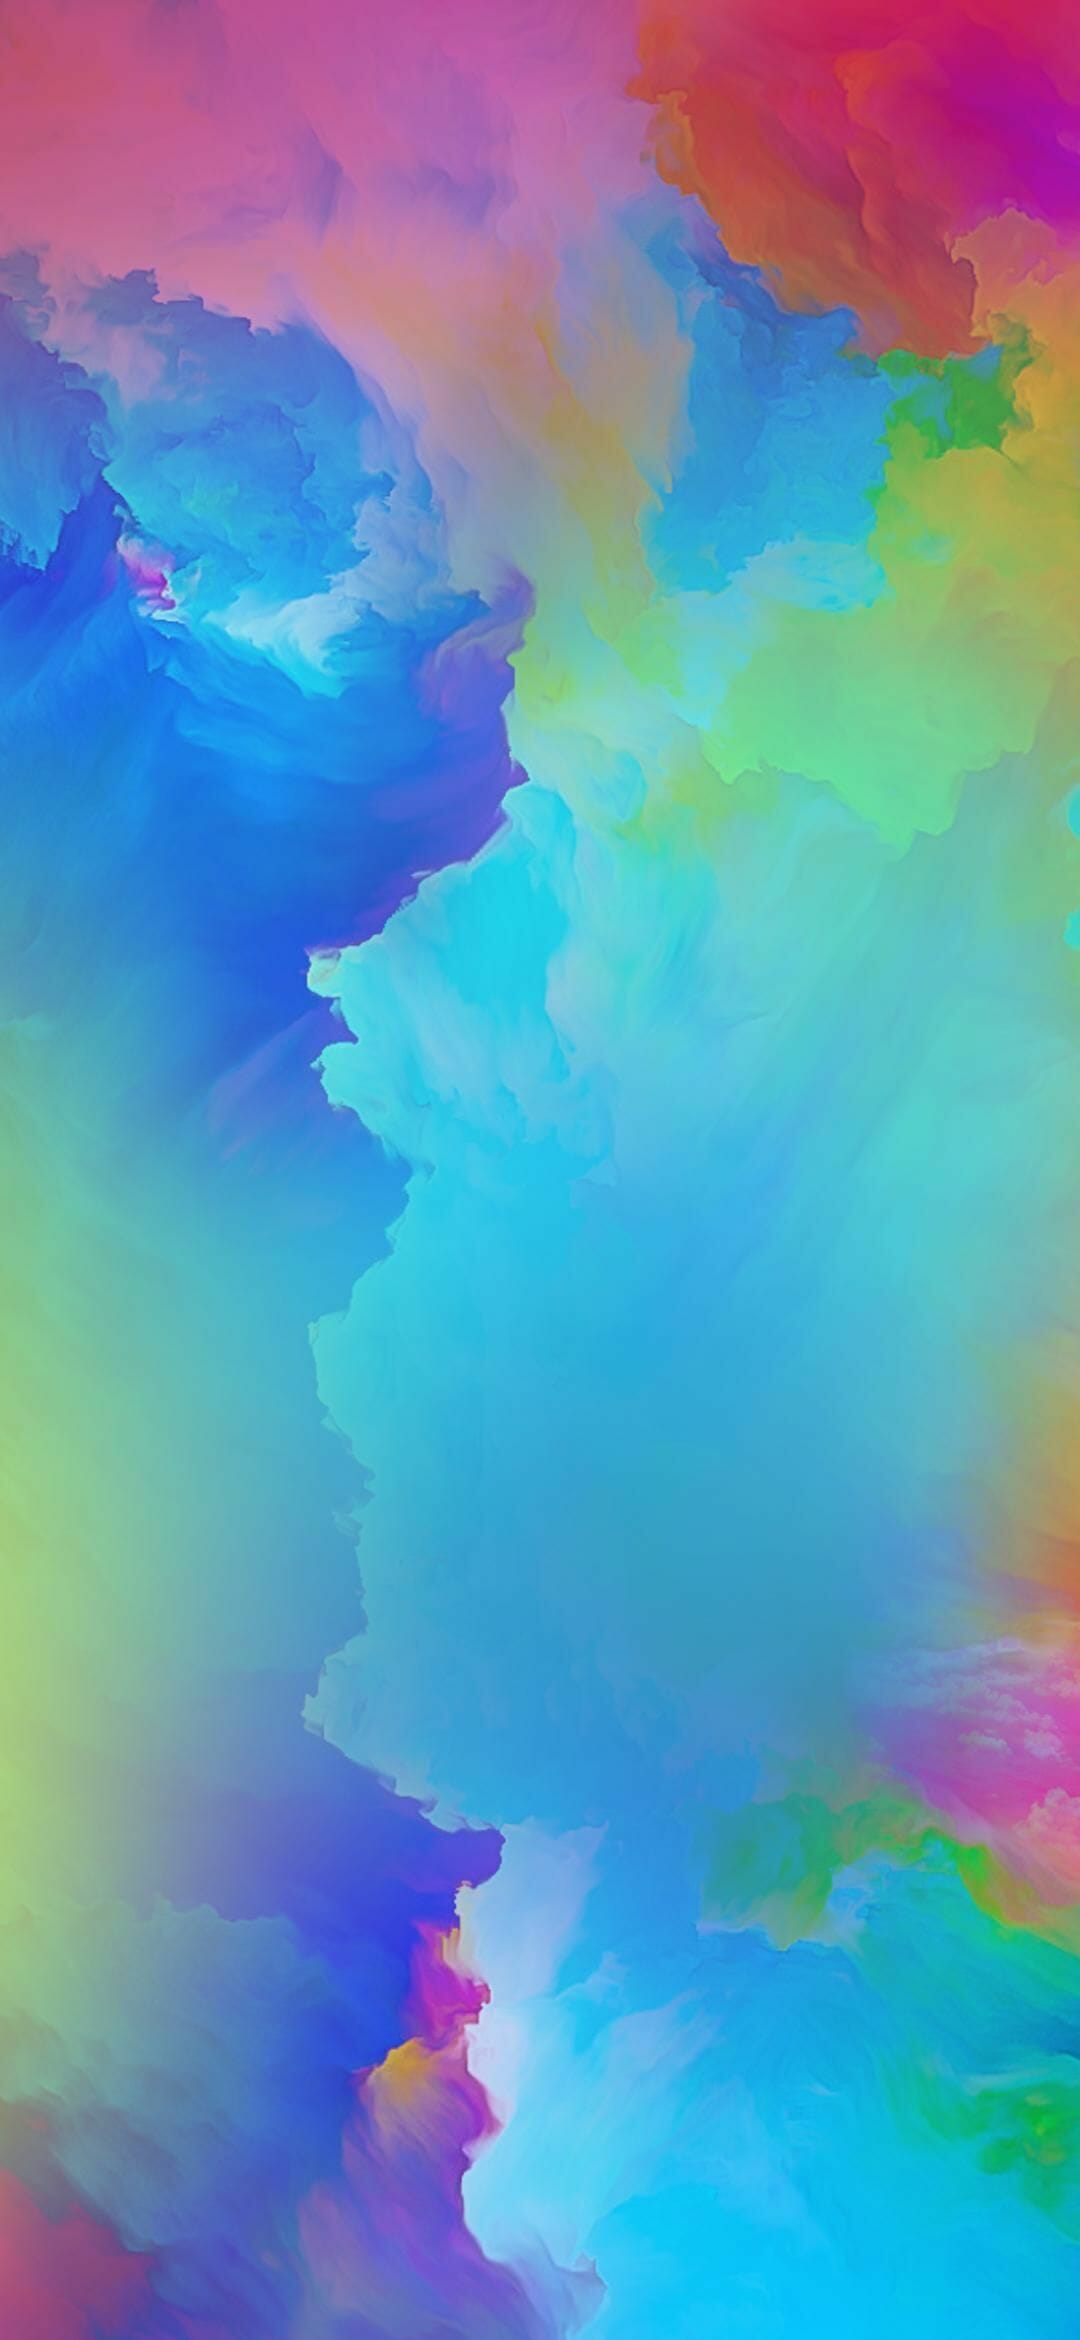 Galaxy A51 Stock Wallpapers